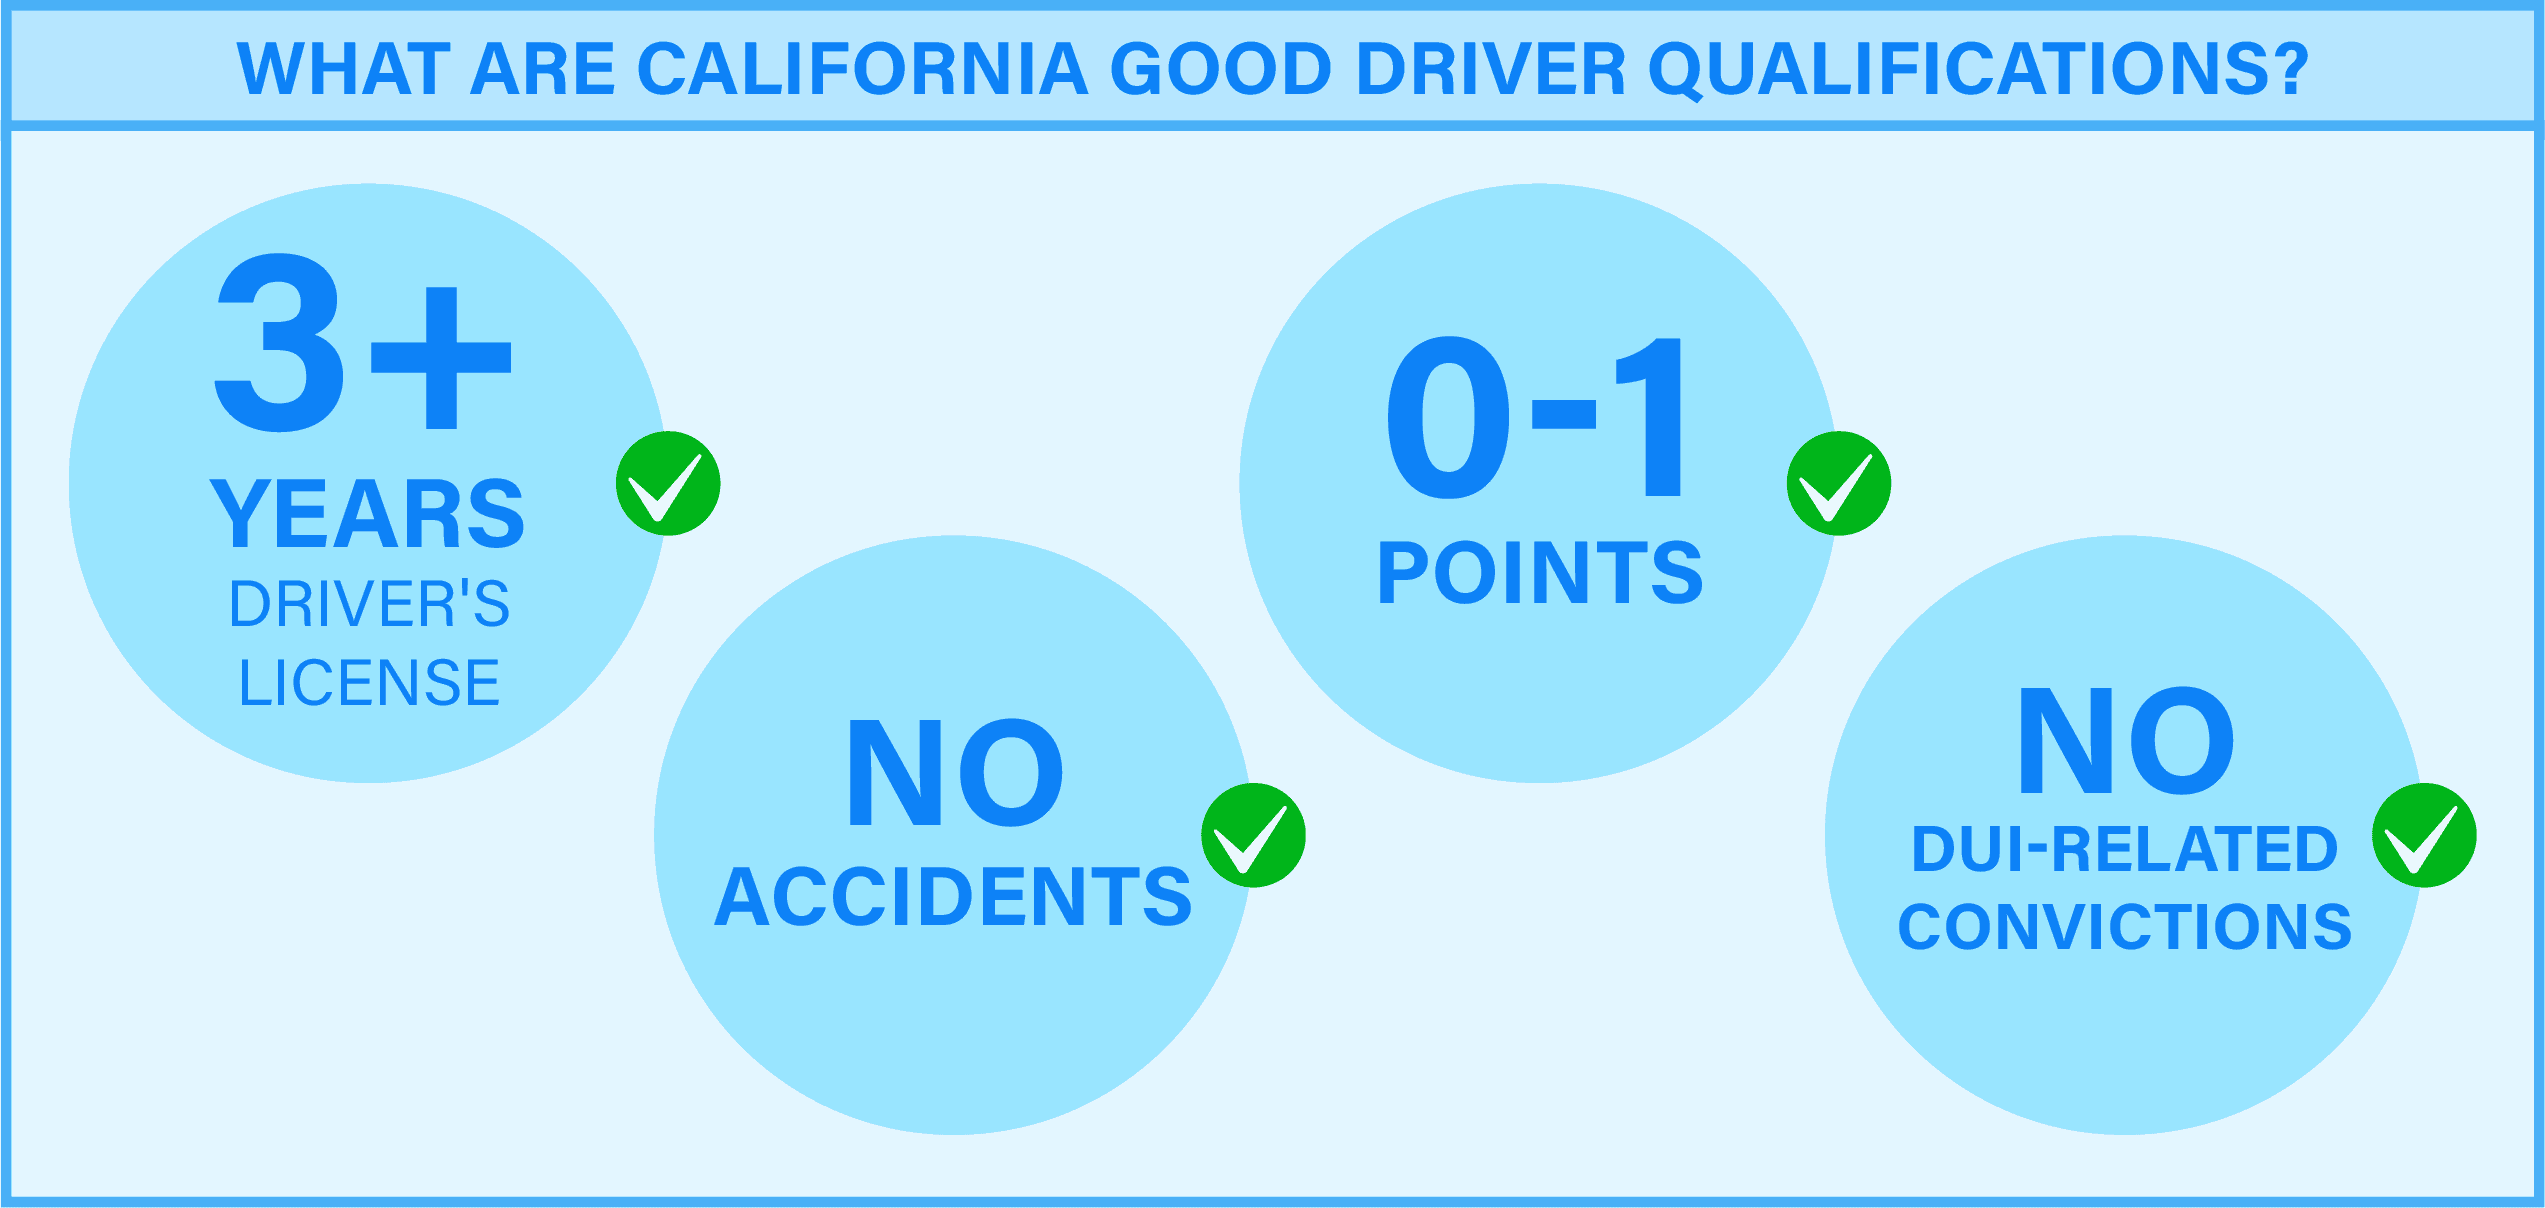 What Are California Good Driver Qualifications